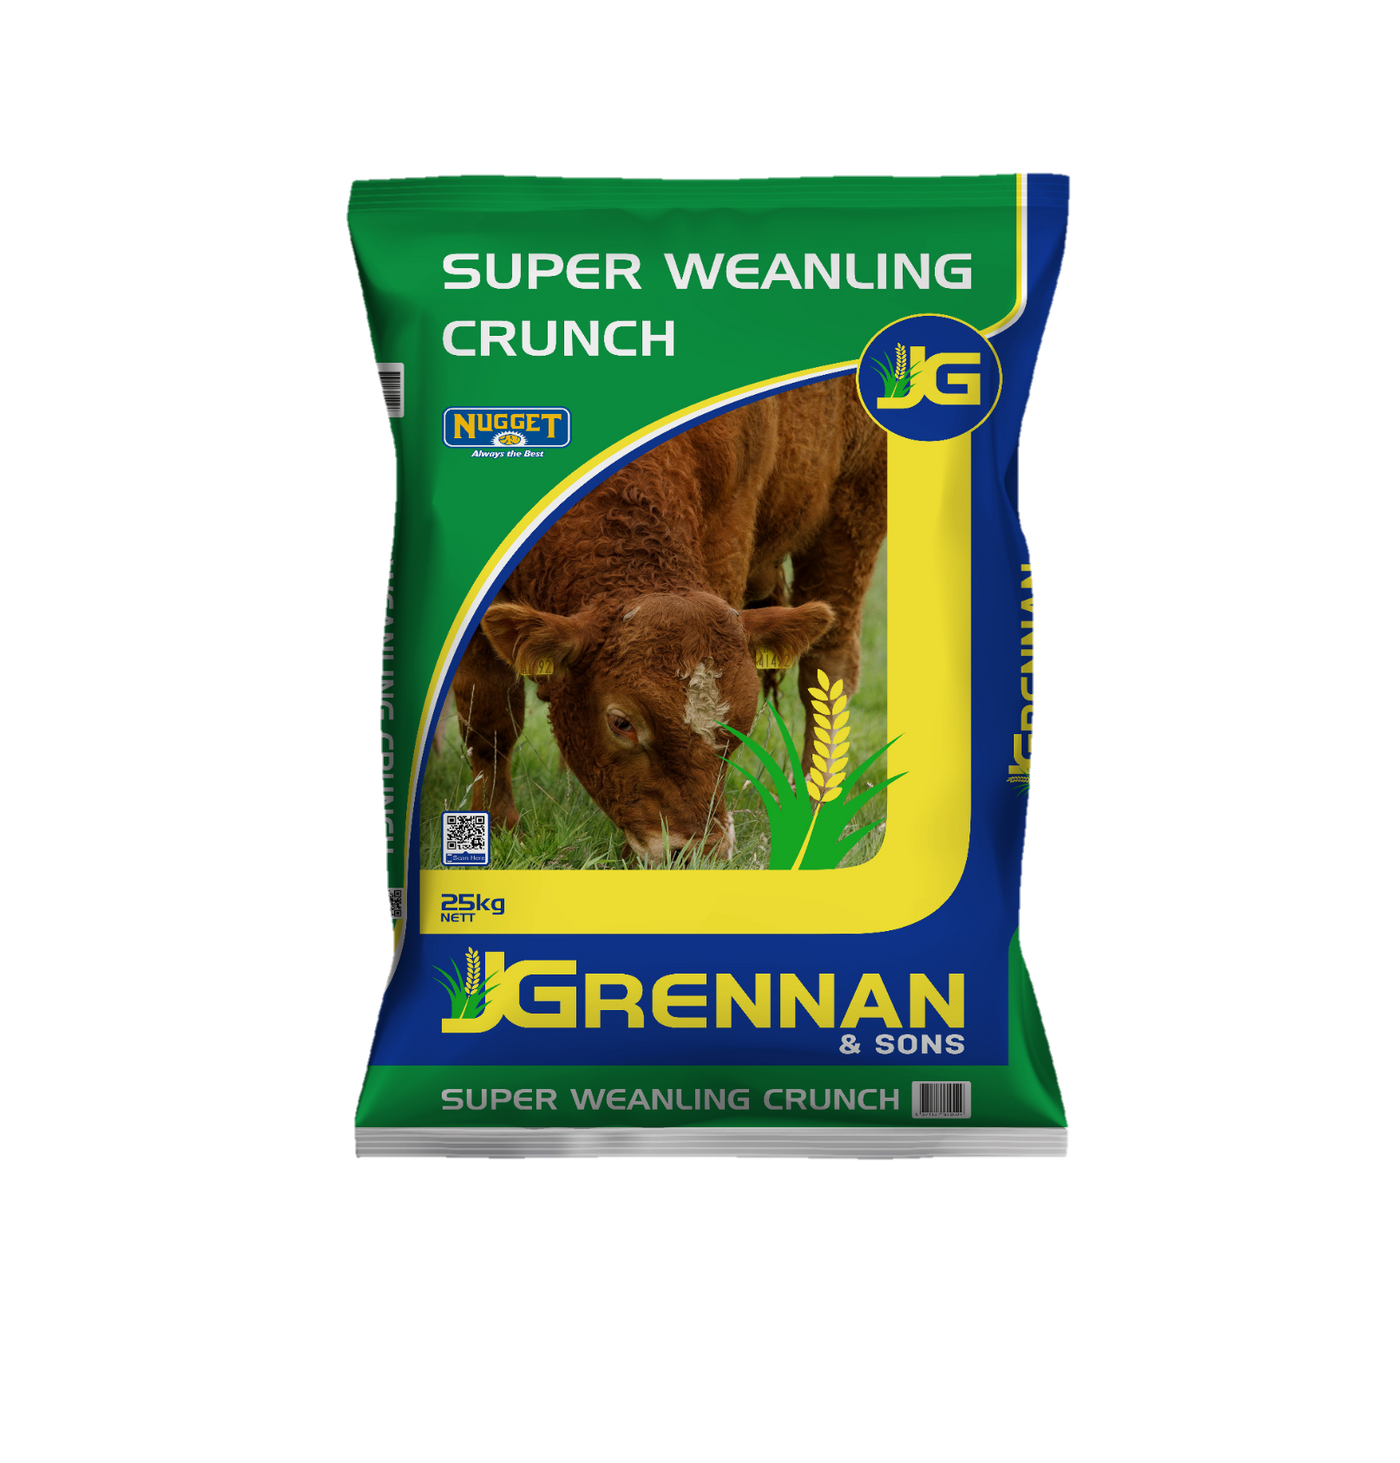 Super Weanling with Lungbooster